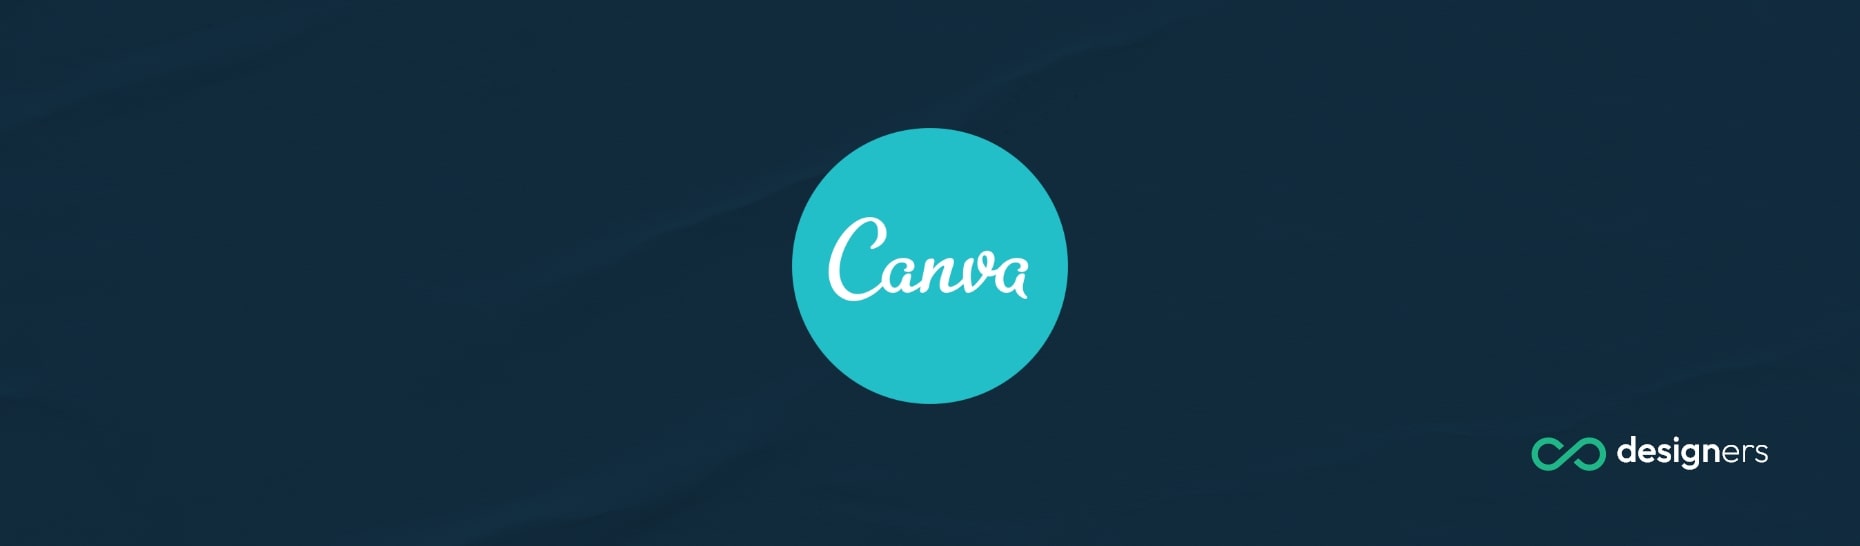 Is Bannersnack Better Than Canva?